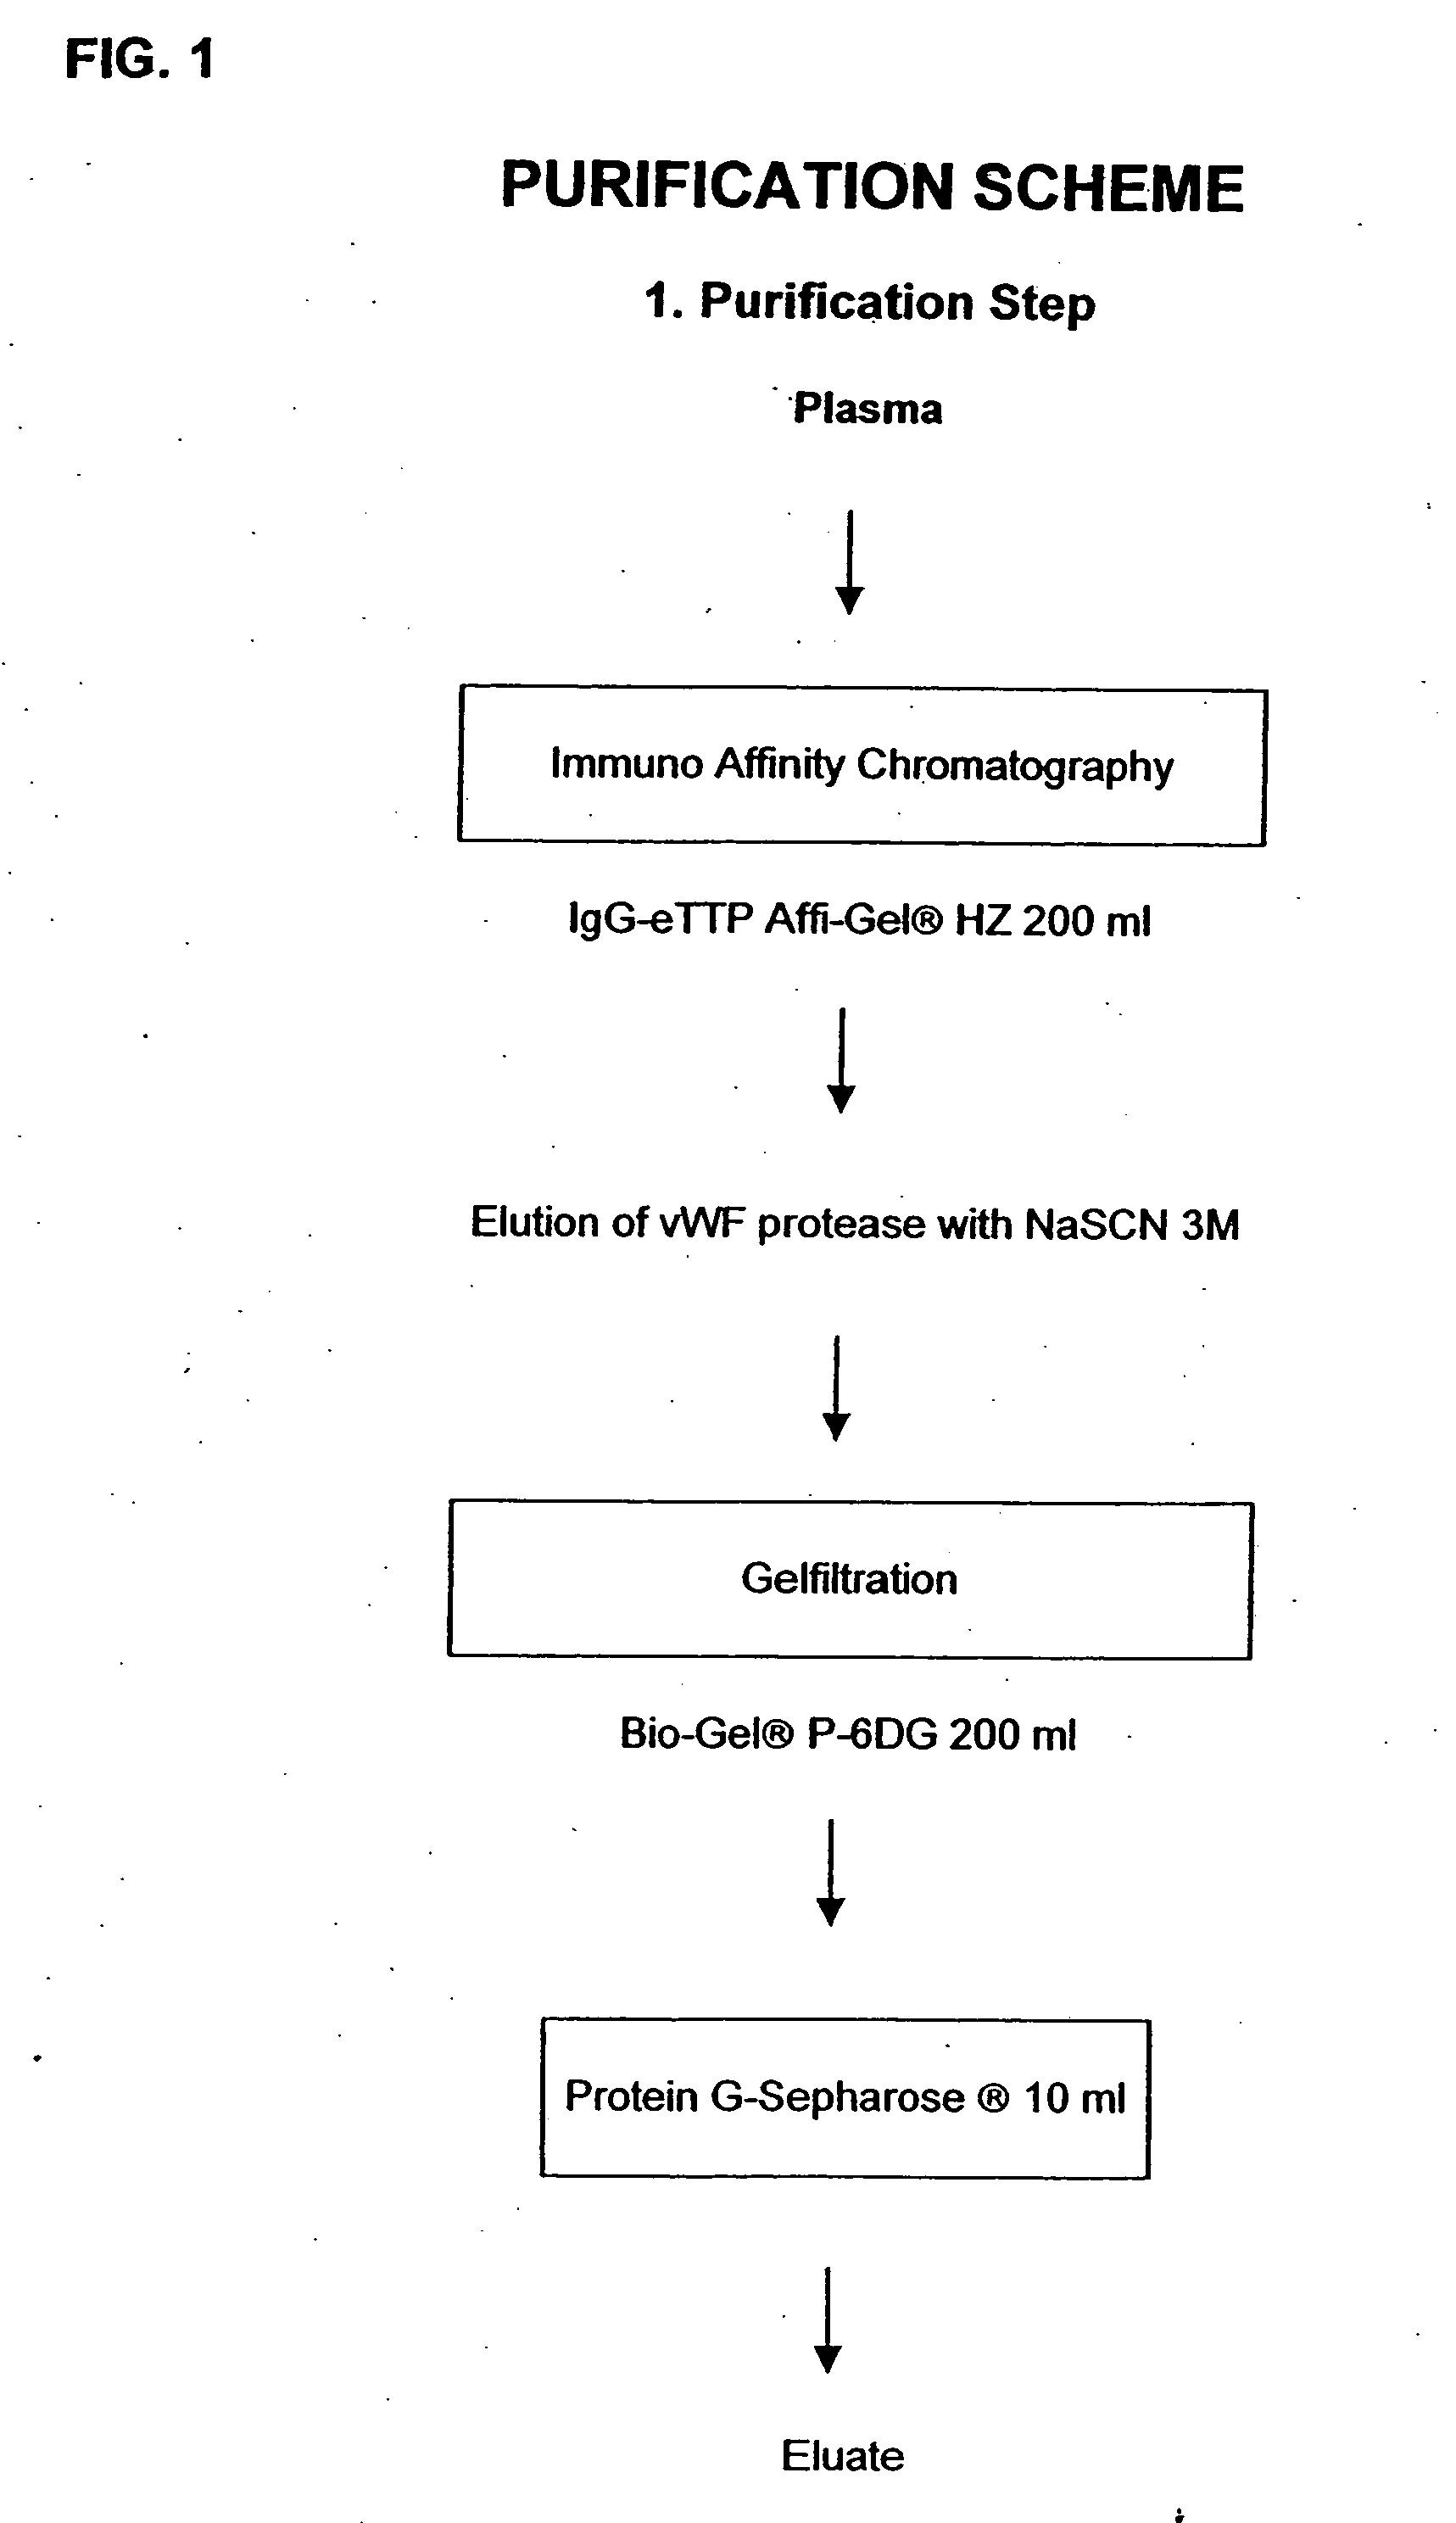 Composition exhibiting a von Willebrand factor (vWF) protease activity comprising a polypeptide chain with the amino acid sequence AAGGILHLELLV